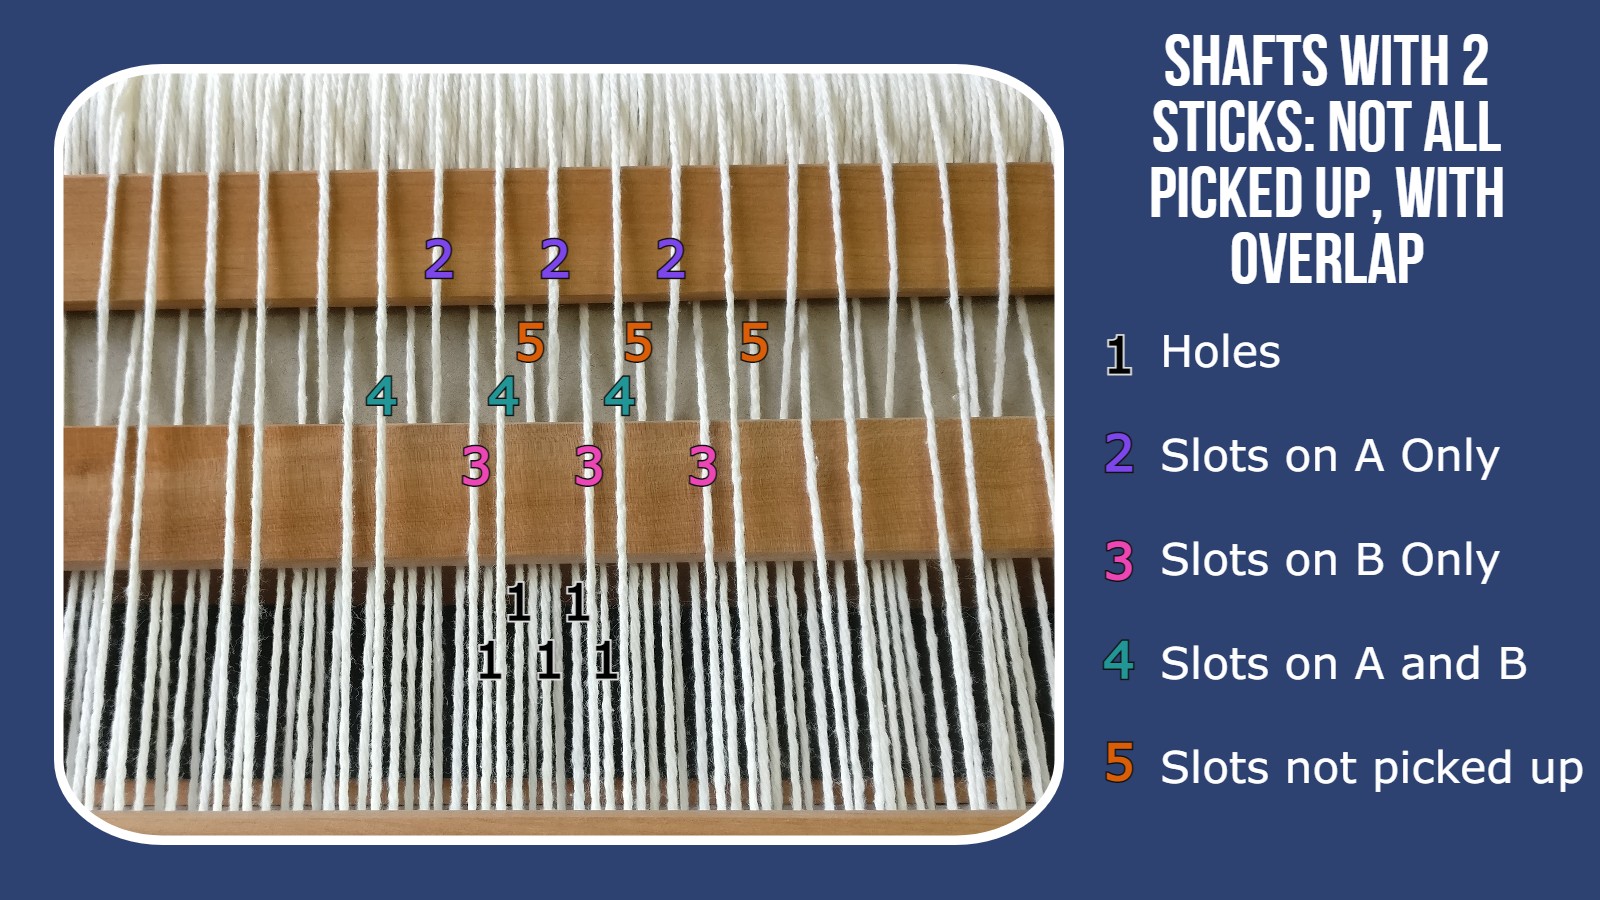 2 stick pick up to shaft illustration: different patterns where not all yarns are picked up